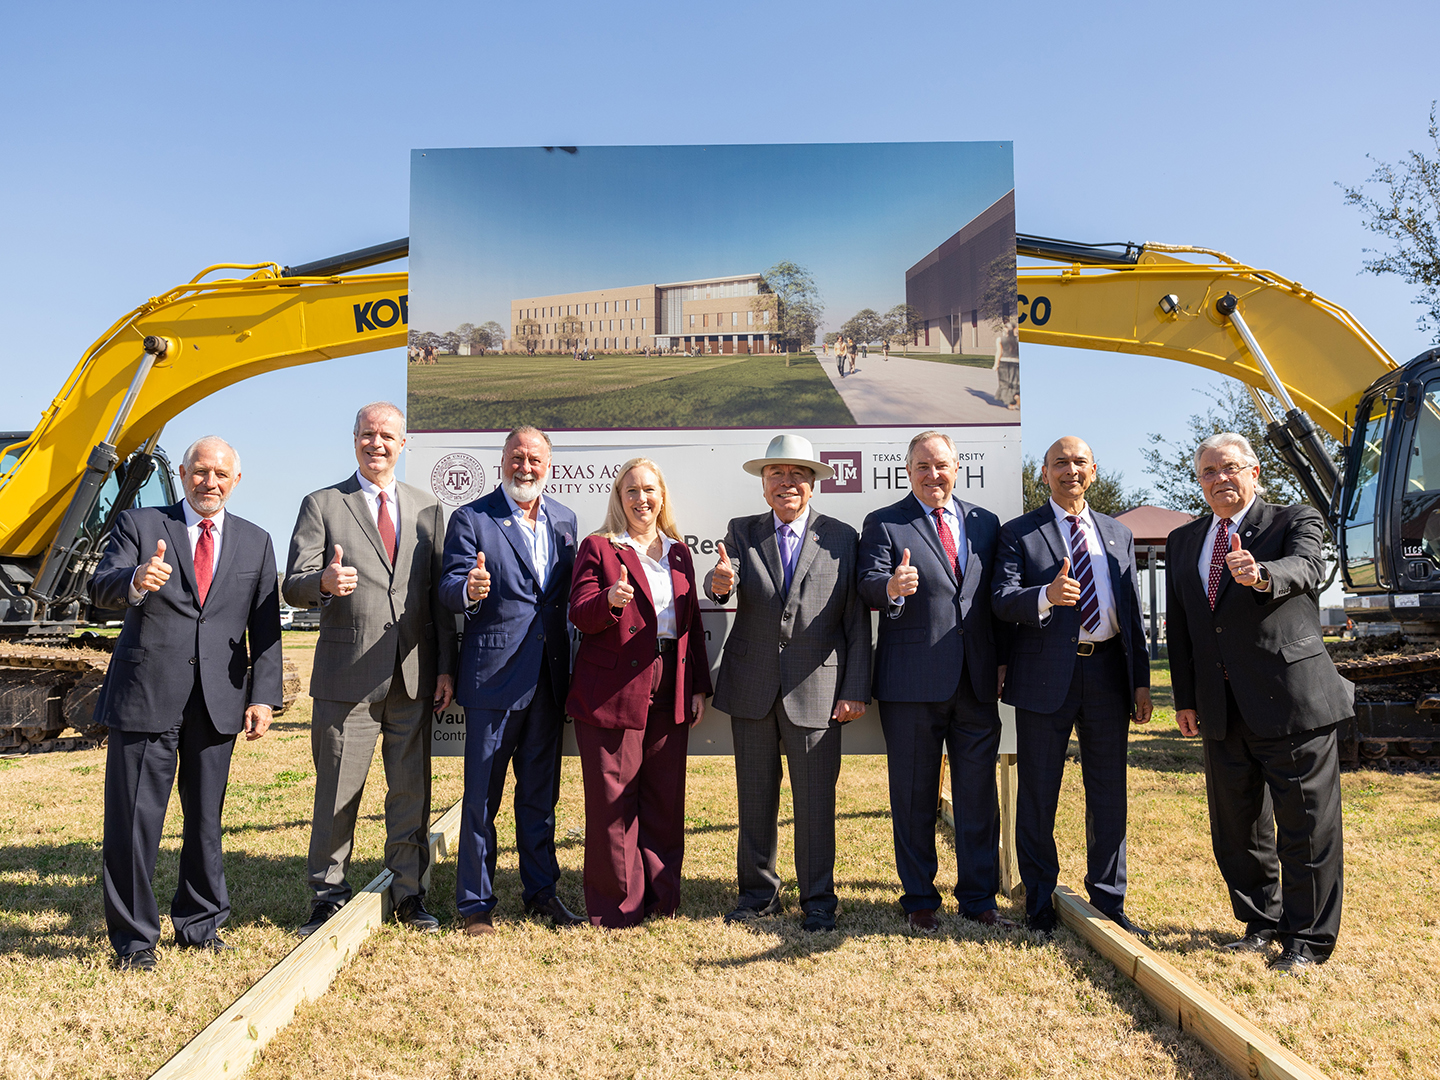 Texas A&M administrators at the groundbreaking in McAllen